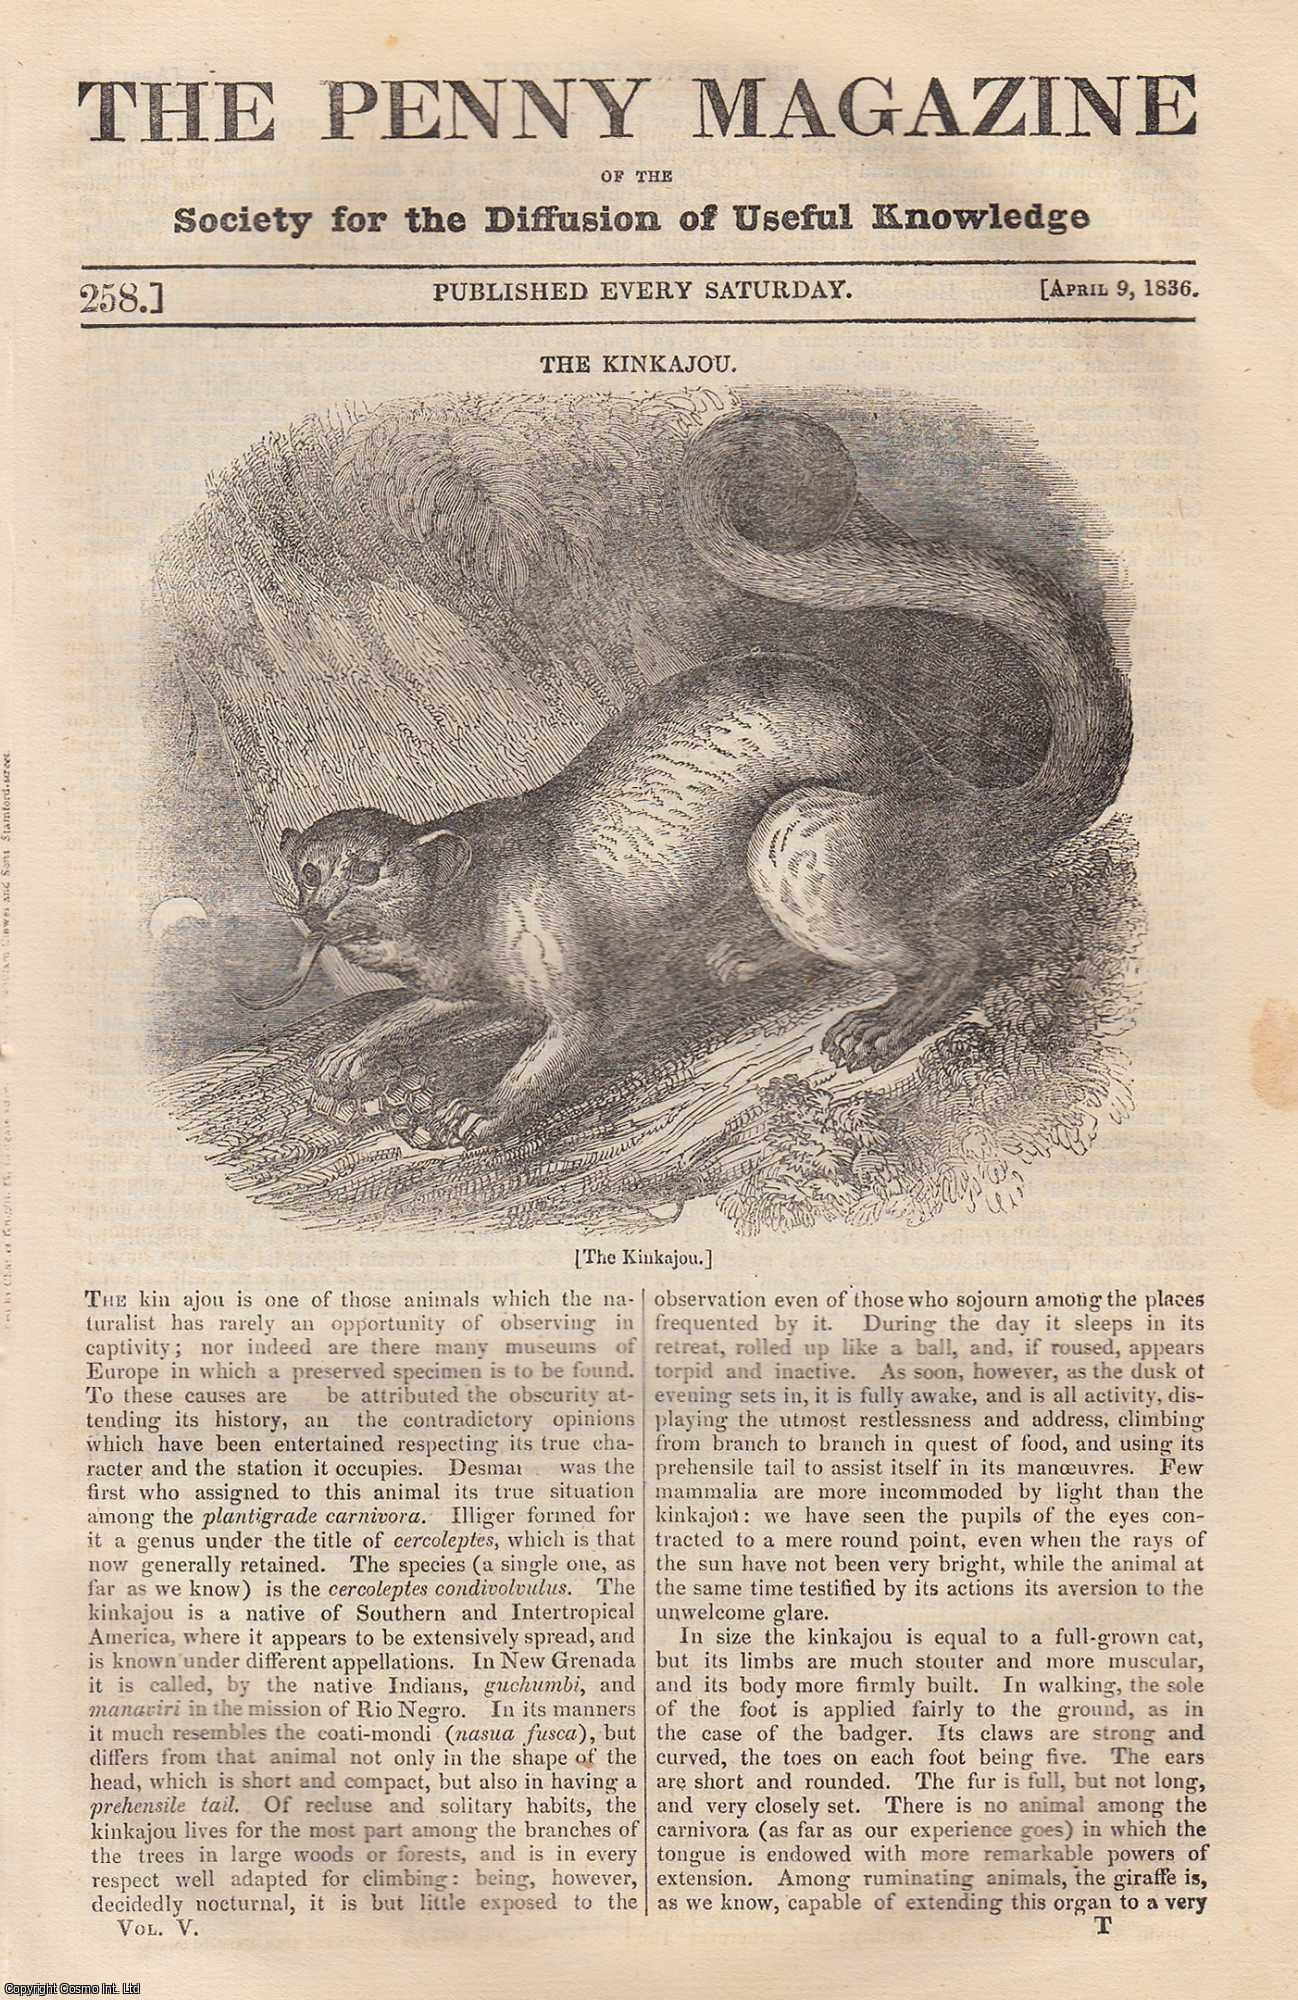 Penny Magazine - The Kinkajou (animal); The High-Wheel (spinning-wheel); The Cathedral of Laon (North of France); The Ancient Kitchen at Stanton Harcourt, etc. Issue No. 258, 1836. A complete original weekly issue of the Penny Magazine, 1836.